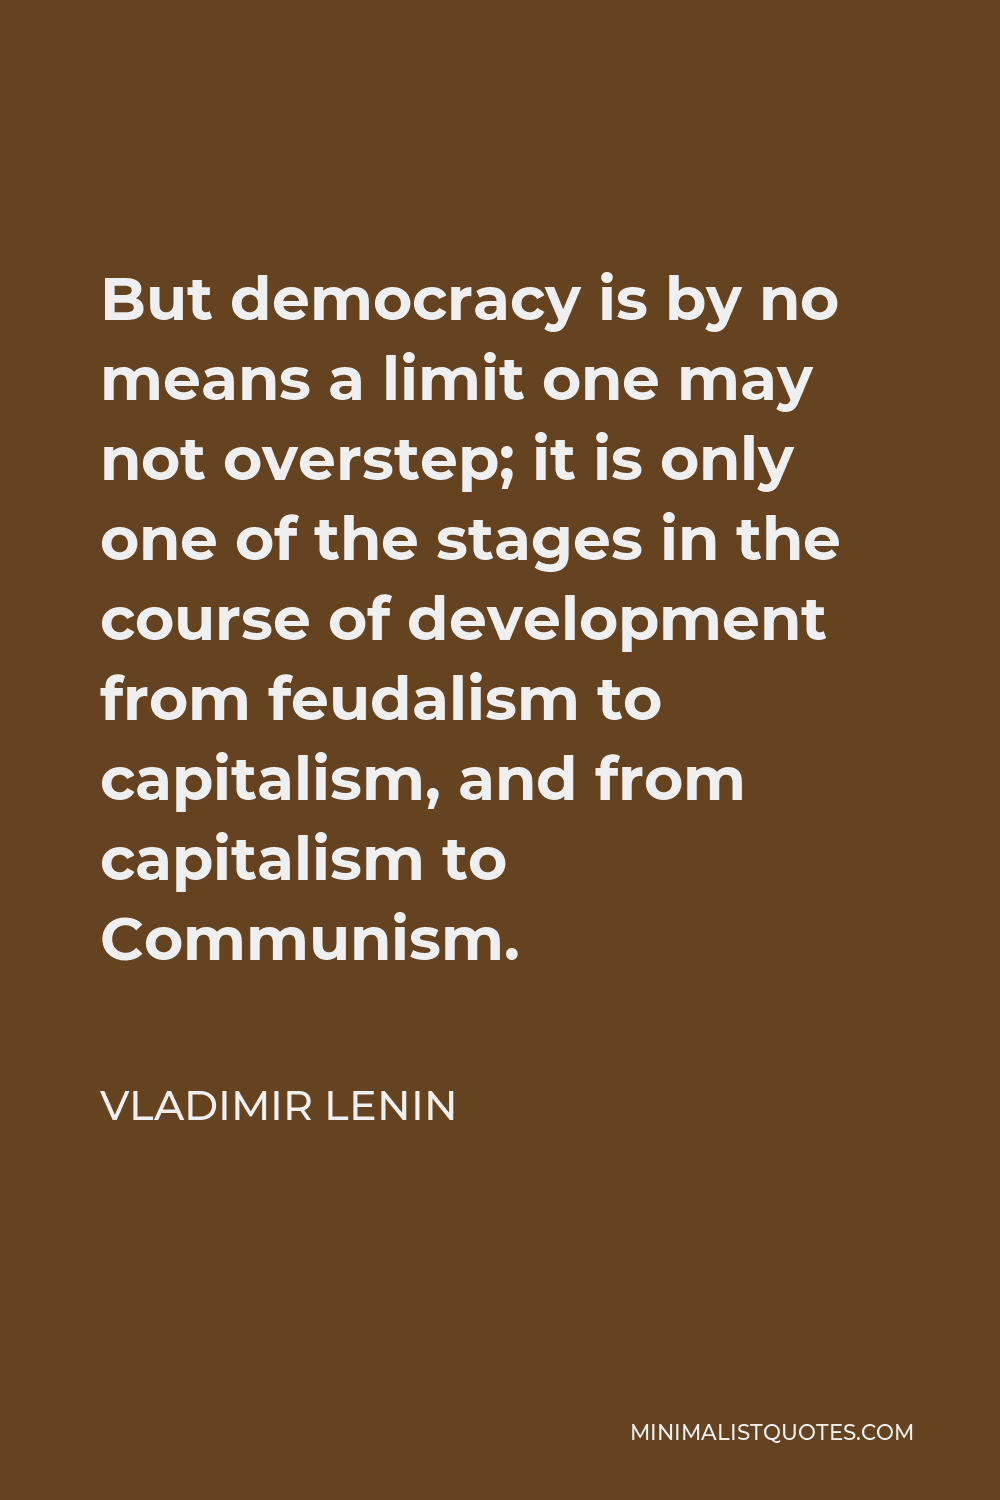 Vladimir Lenin Quote - But democracy is by no means a limit one may not overstep; it is only one of the stages in the course of development from feudalism to capitalism, and from capitalism to Communism.